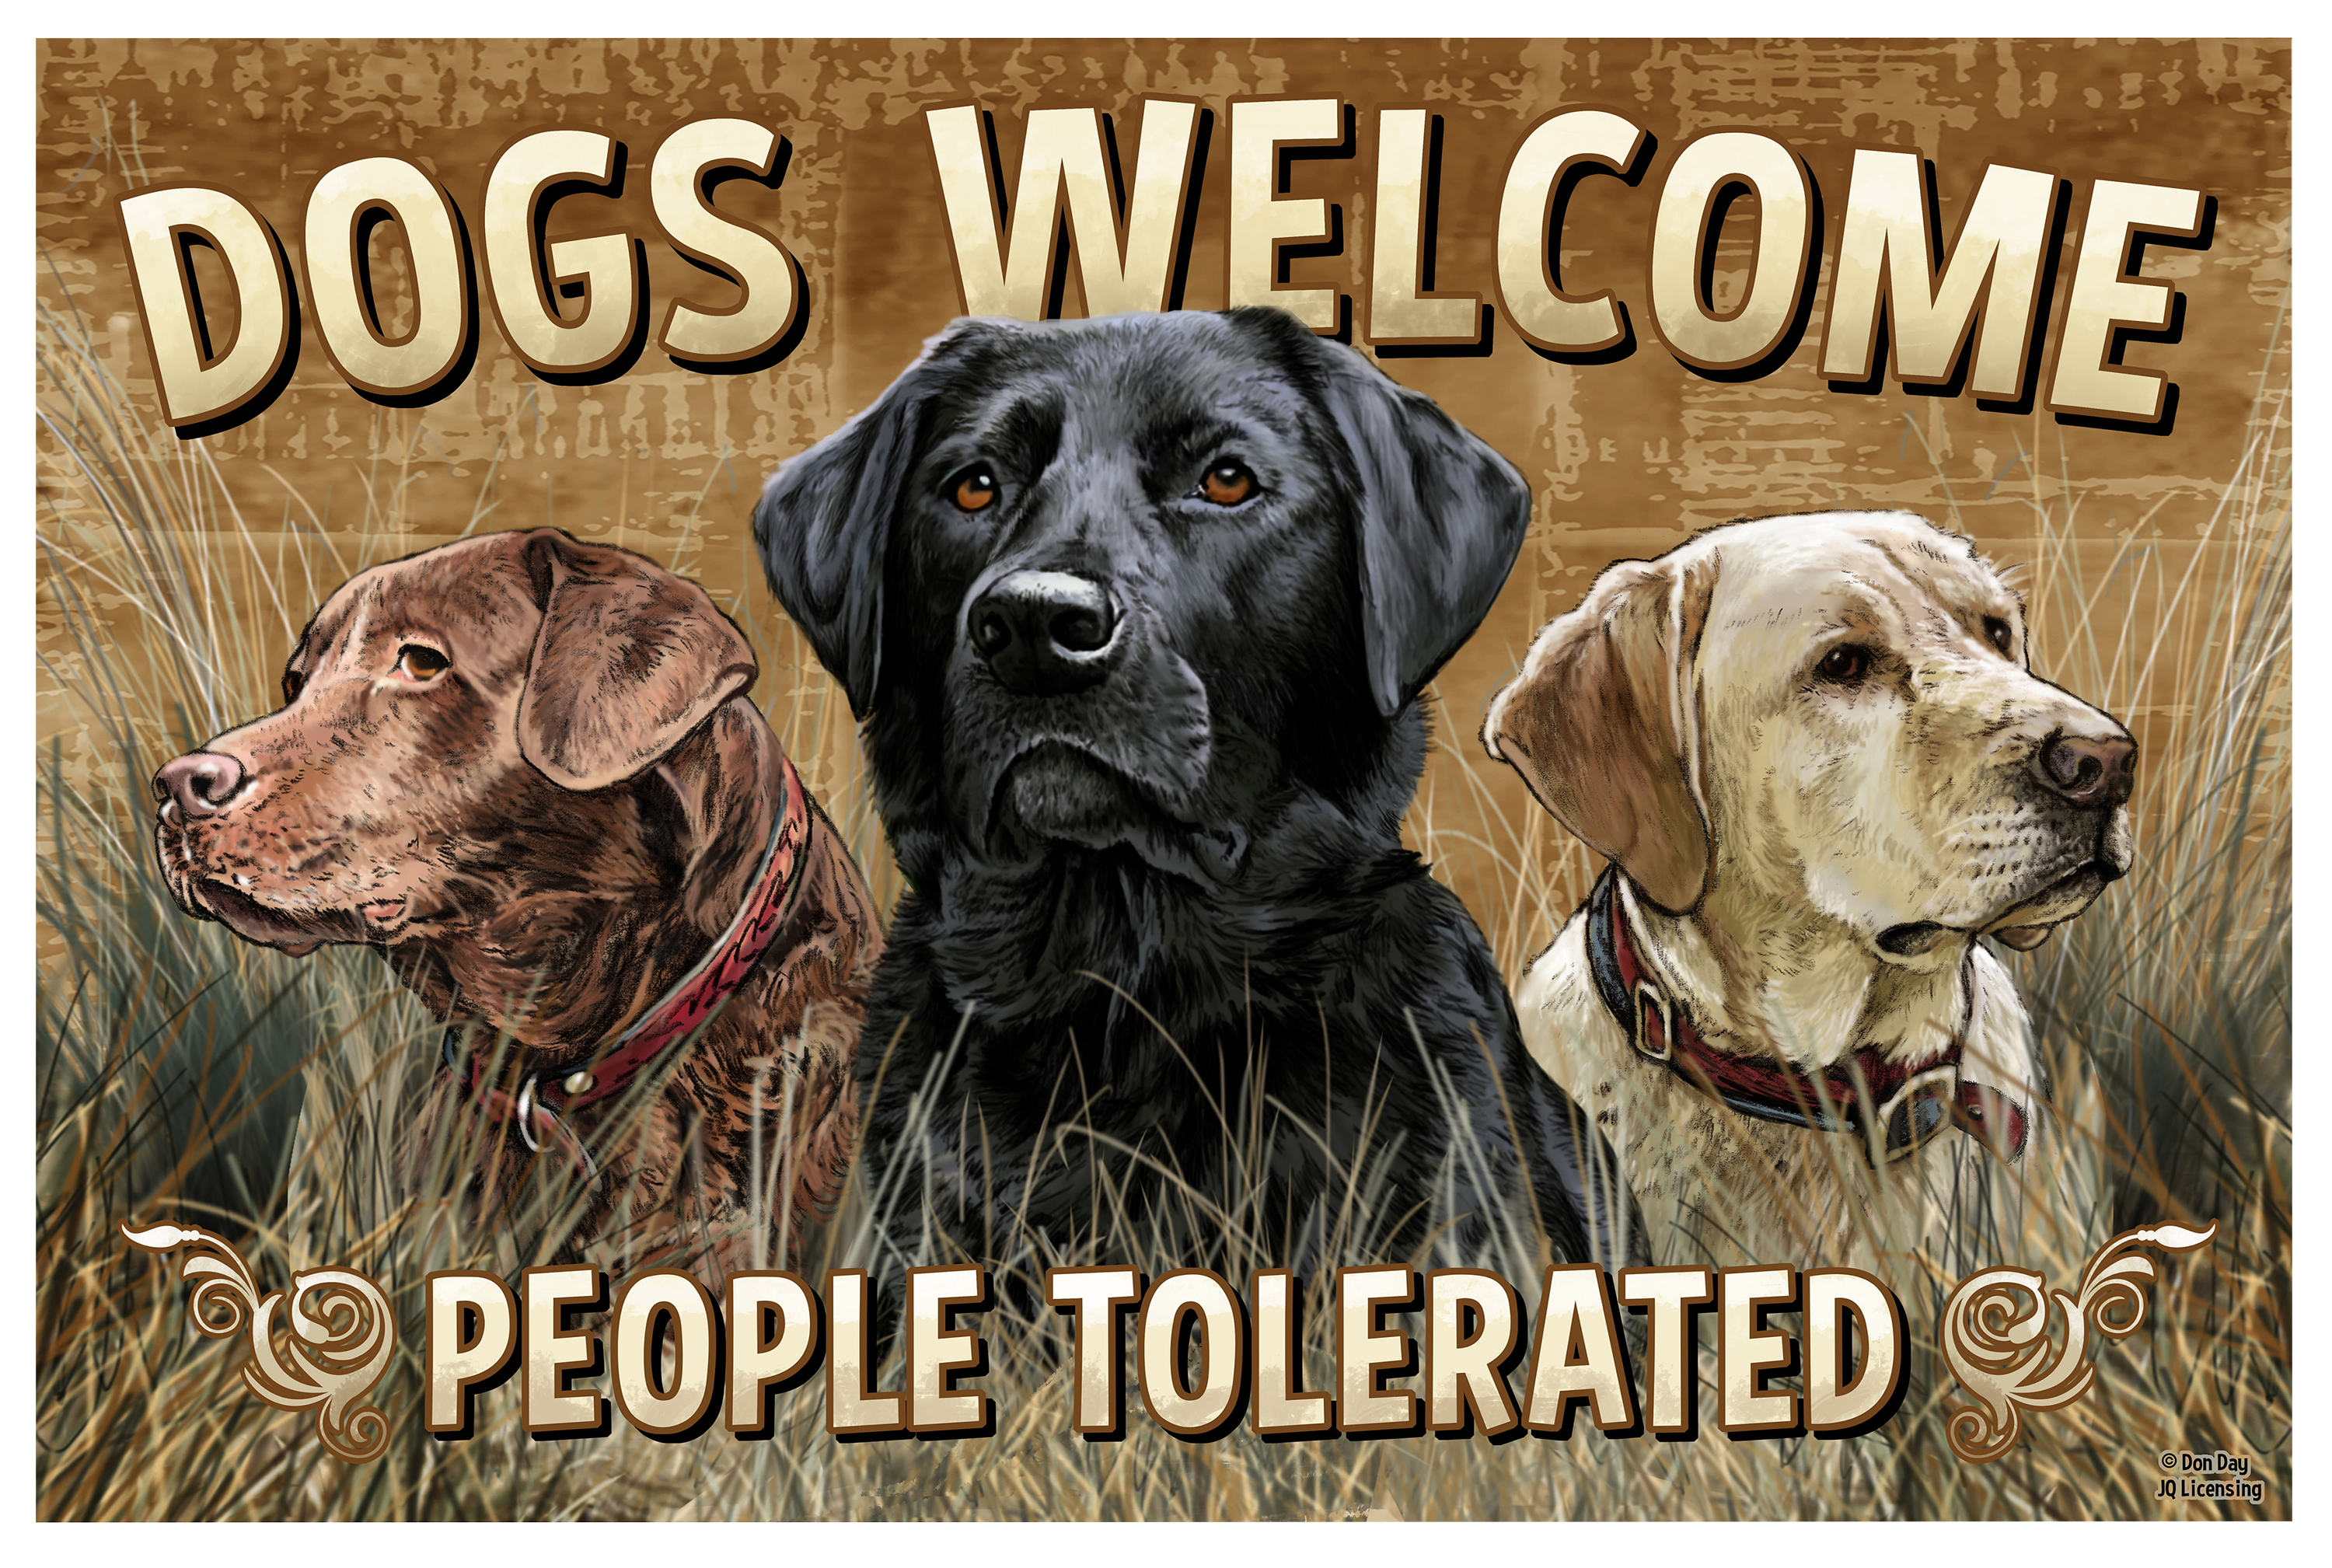 Dogs Welcome People Tolerated Doormat 23.6x15.7 inch, Dogs Welcome Door Mat, Dogs Welcome Entrance Mat Thick Non-Slip, Dogs Welcome Mat, Funny Welcome